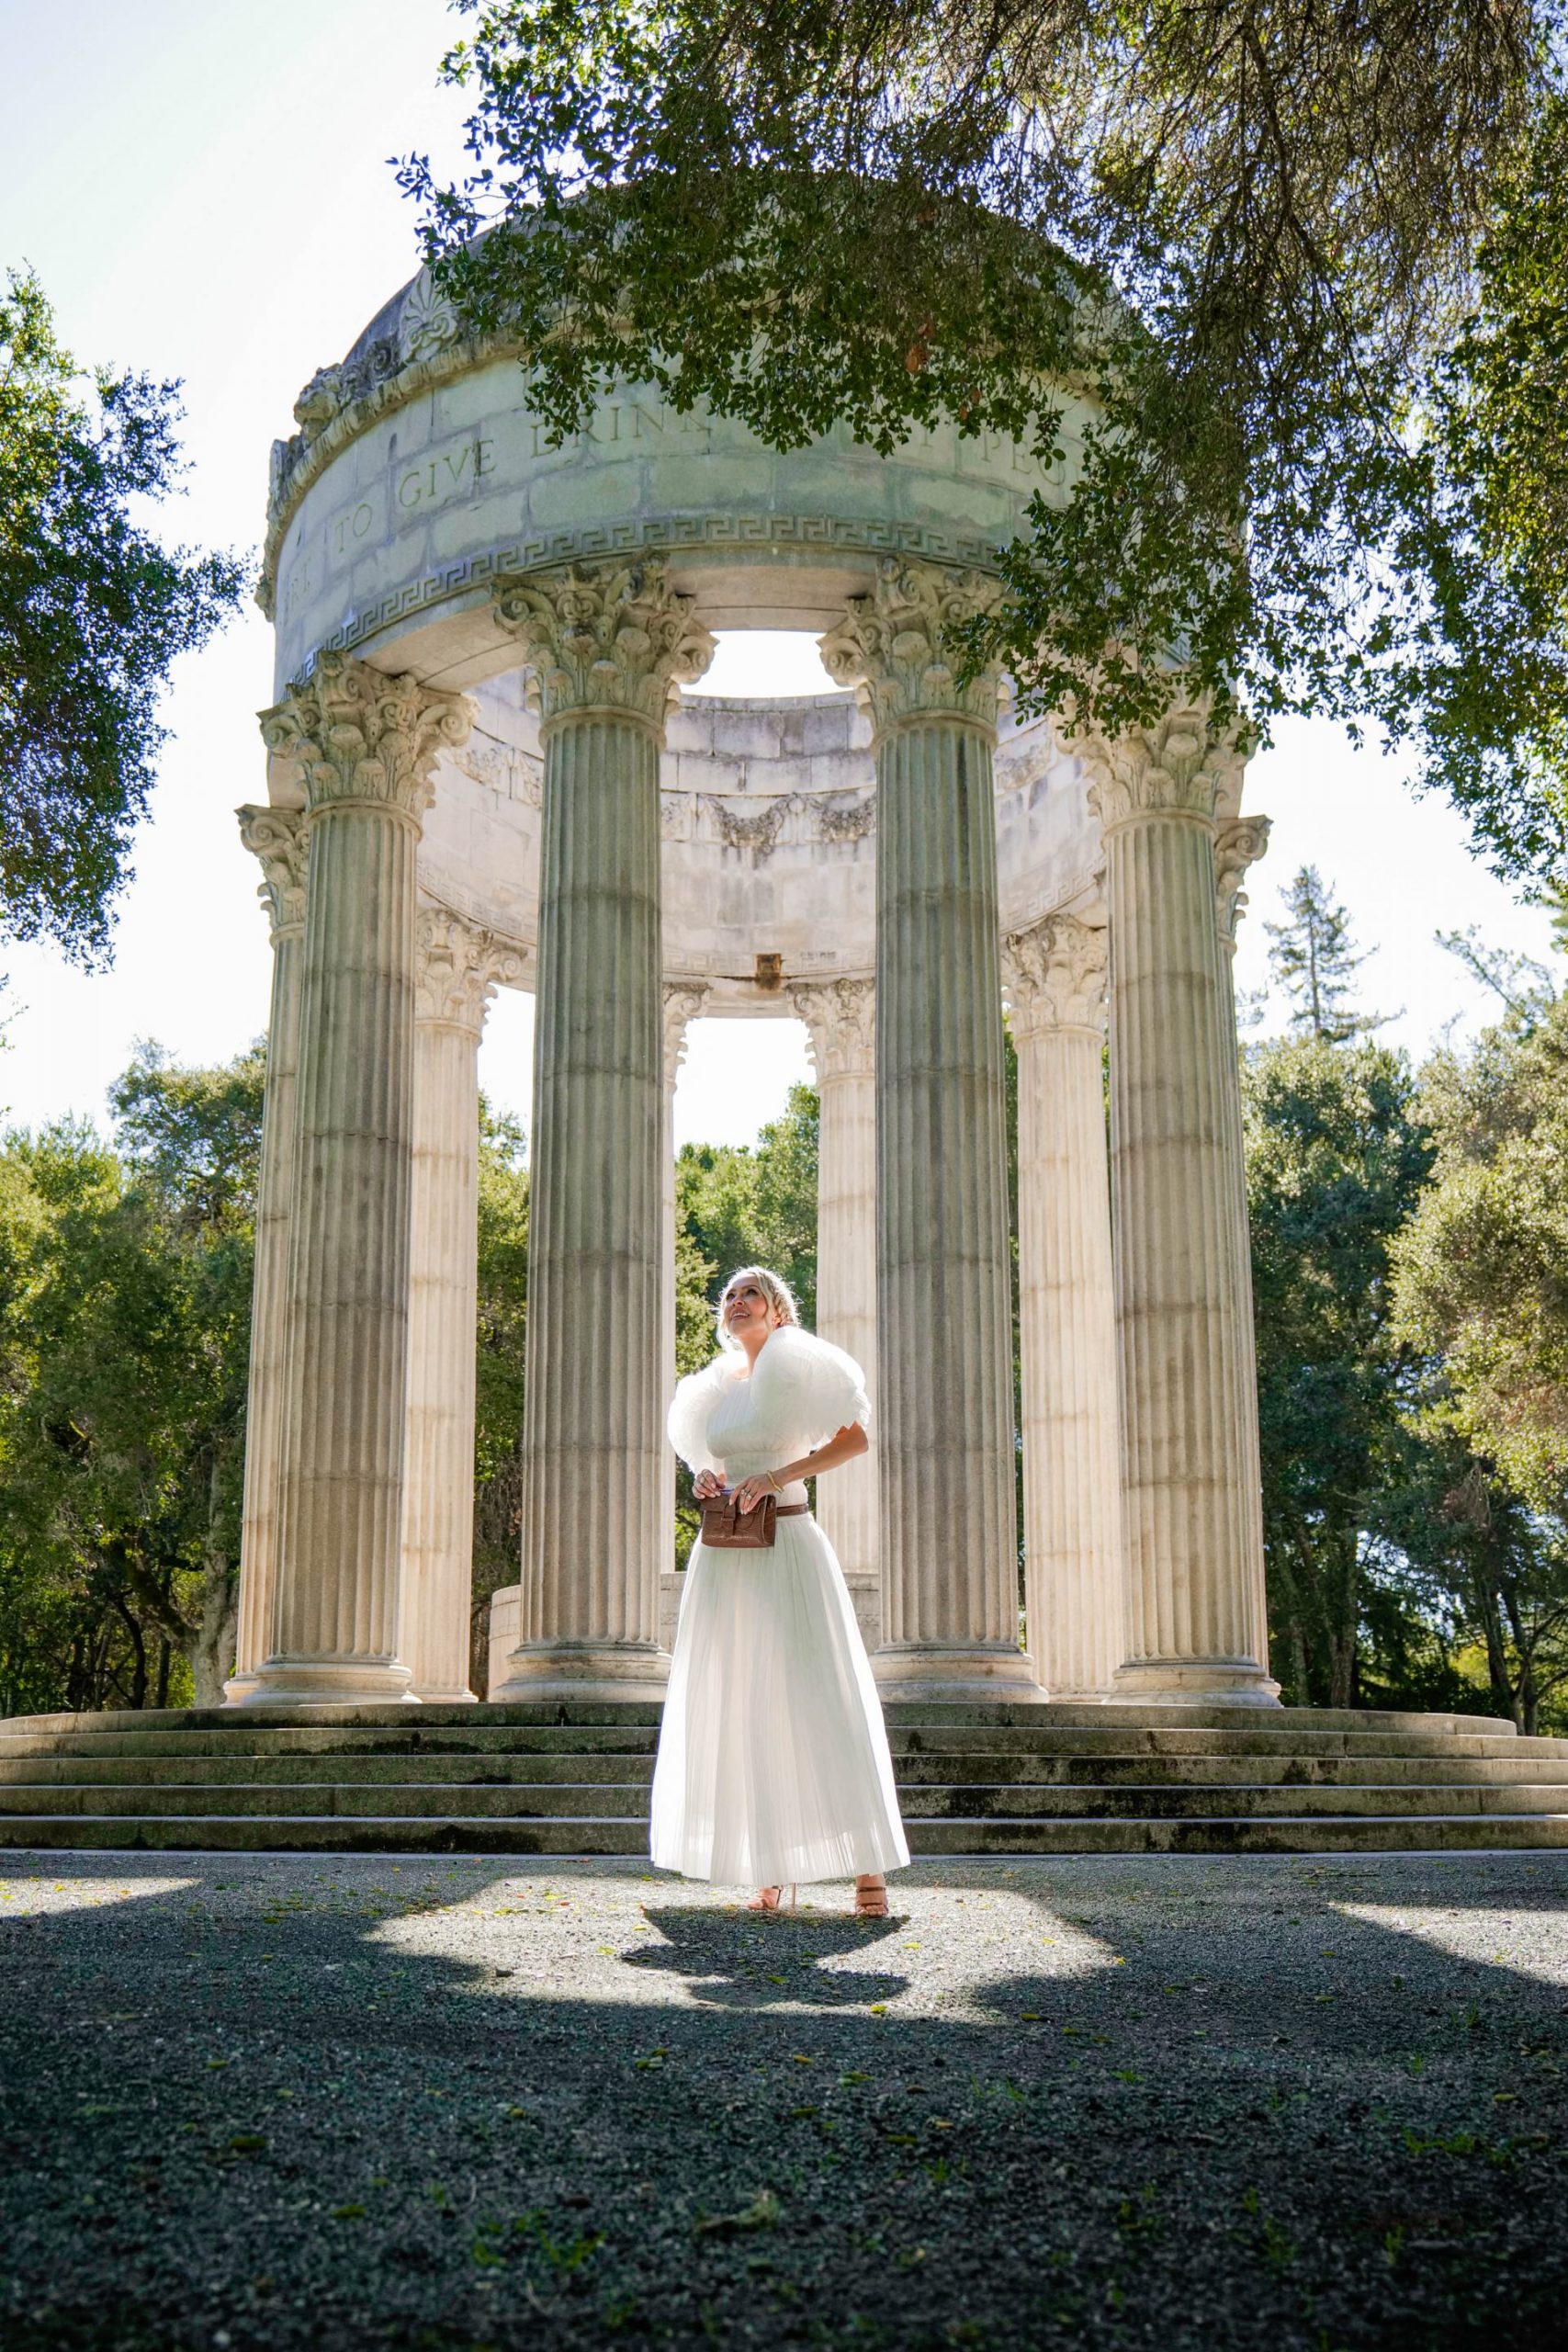 The Pulgas Water Temple Redwood city California. Photo shoot ideas, San Francisco Bay Area. Best photo locations in SF for a wedding.